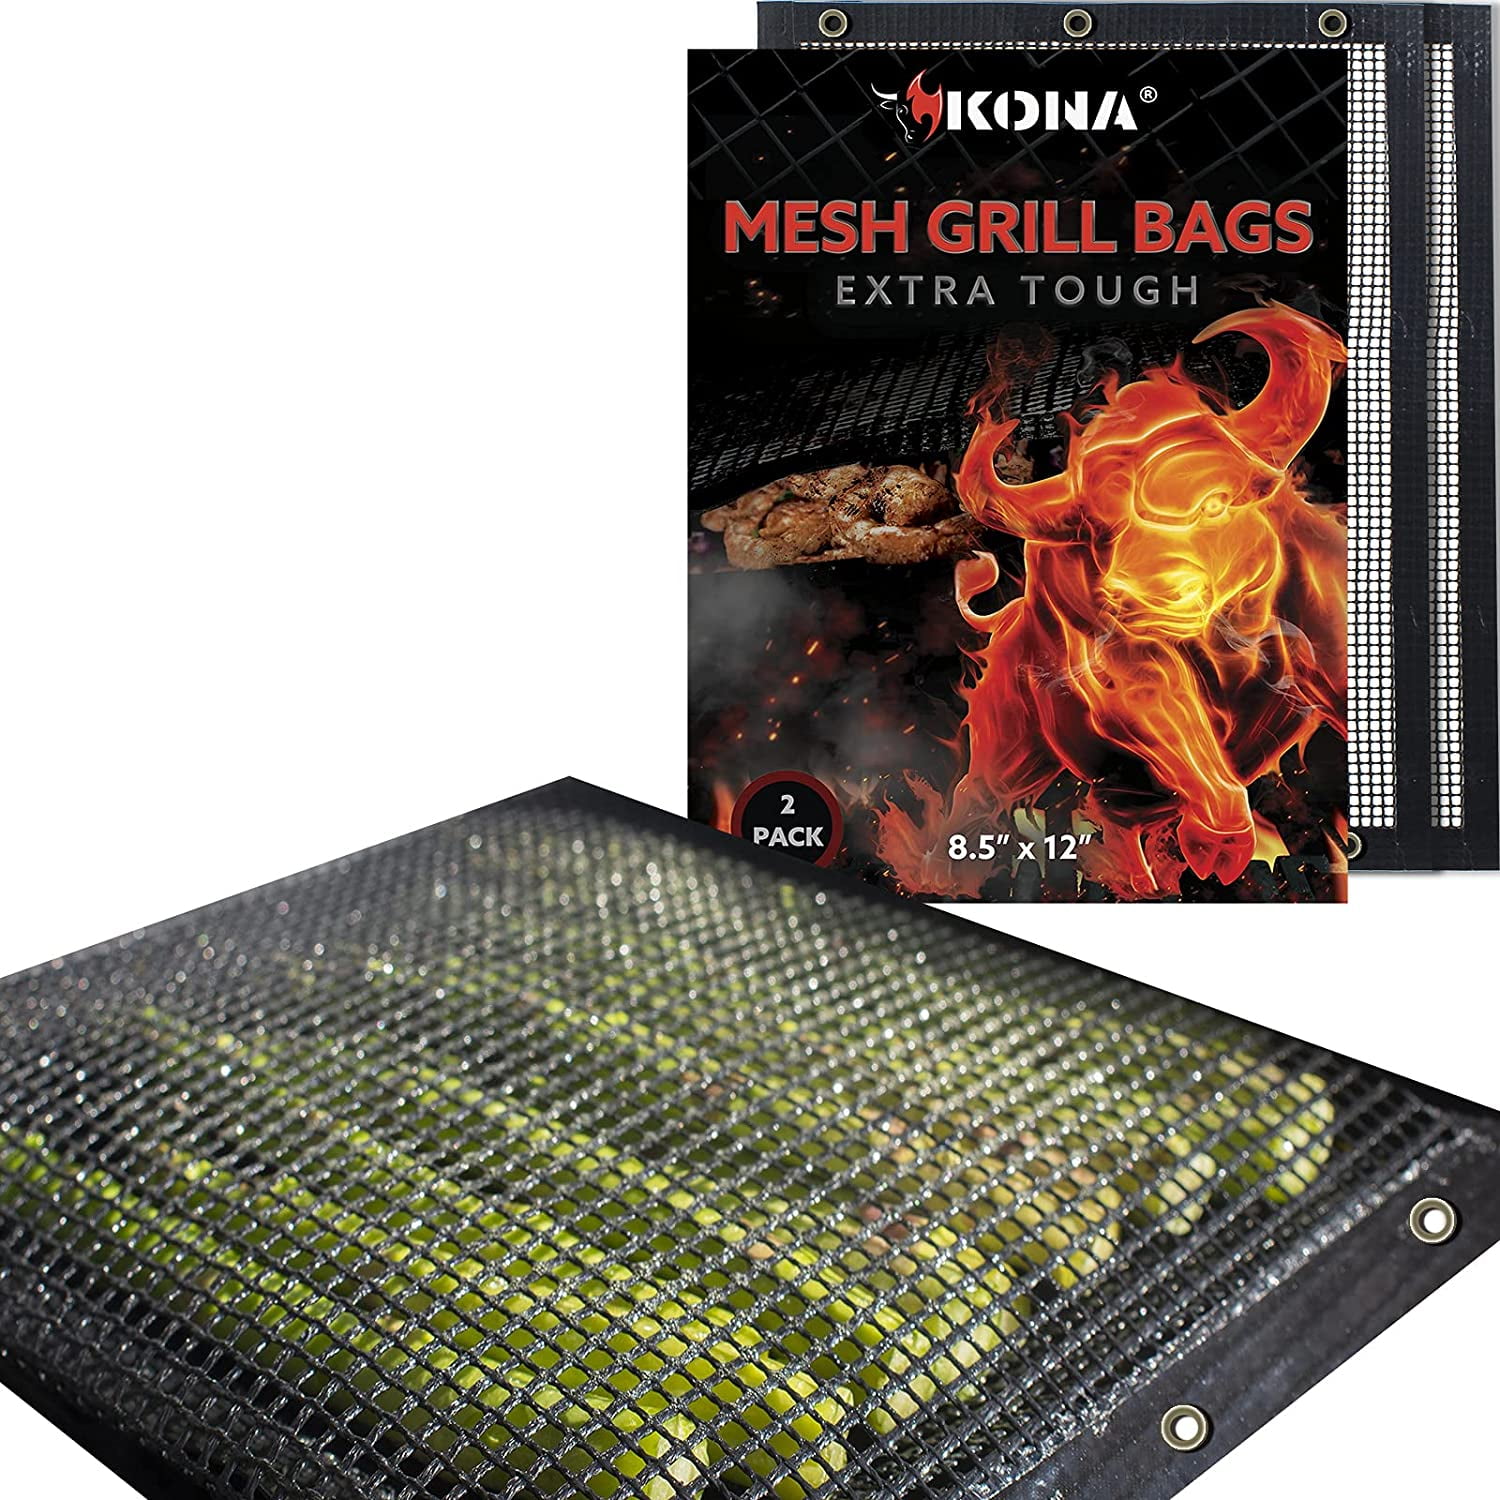 KONA Mesh Grill Bags, Non-Stick BBQ Grilling Bags (Set of 2)